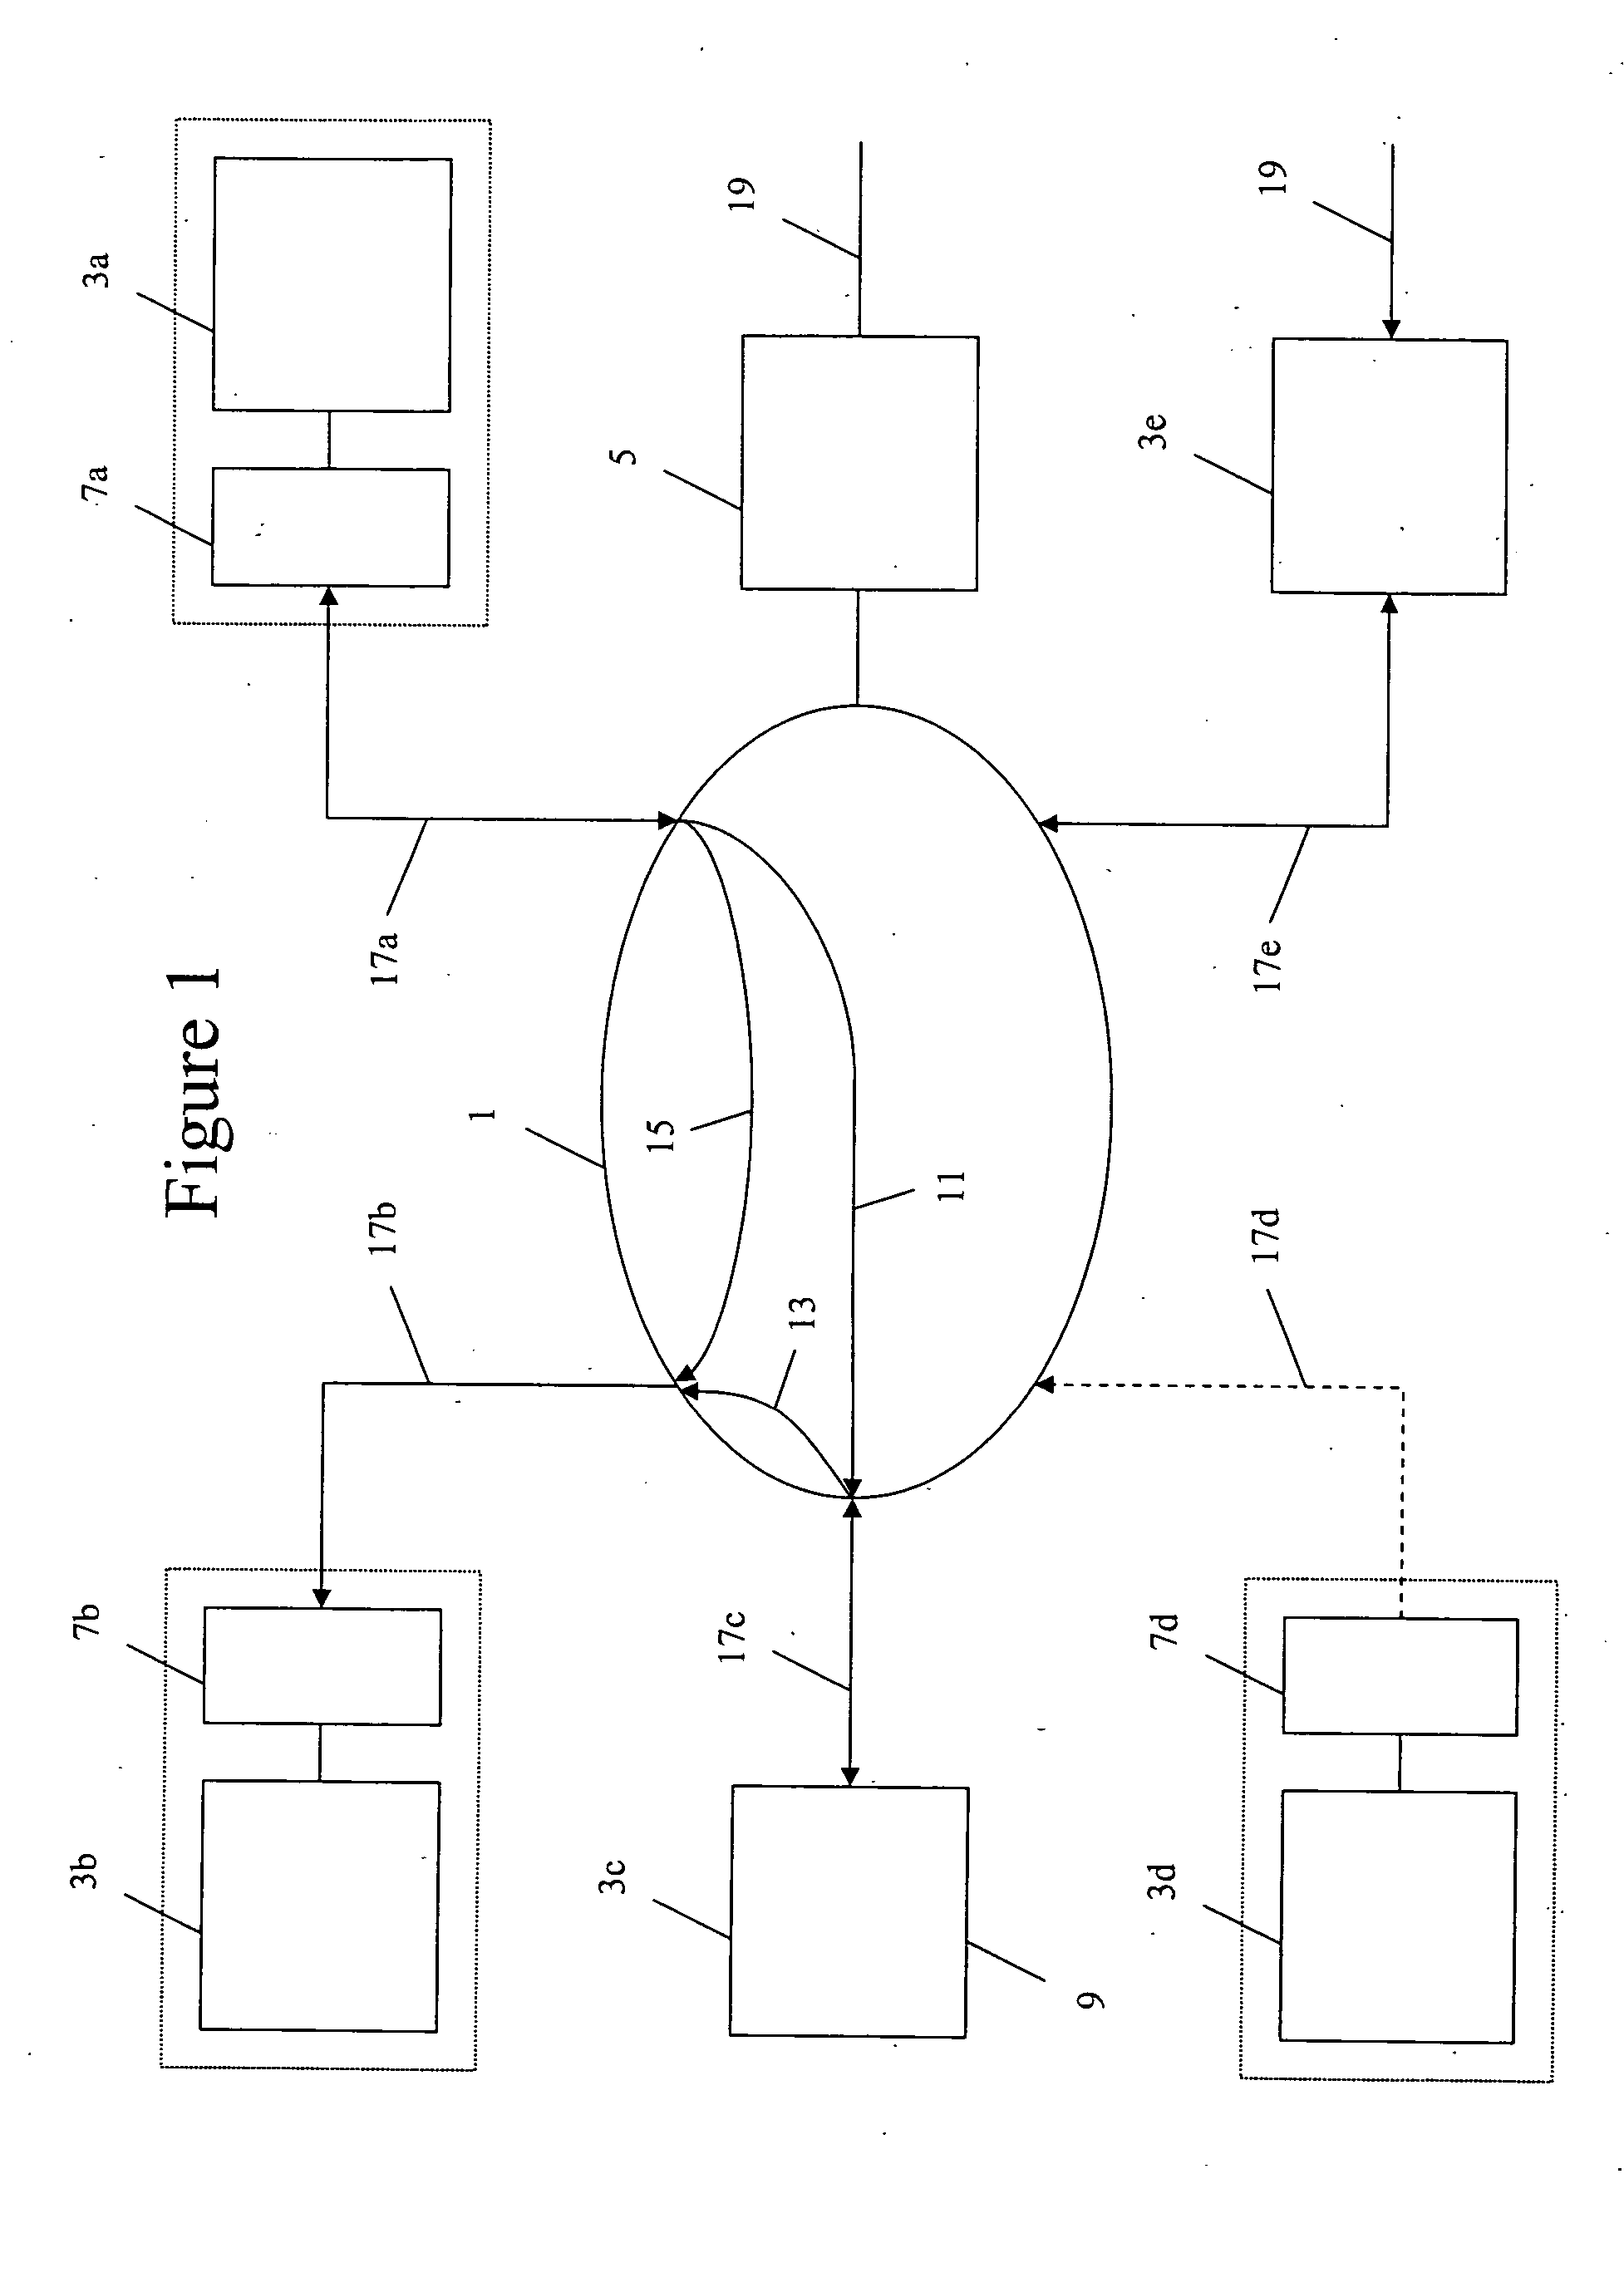 Method for controlling services